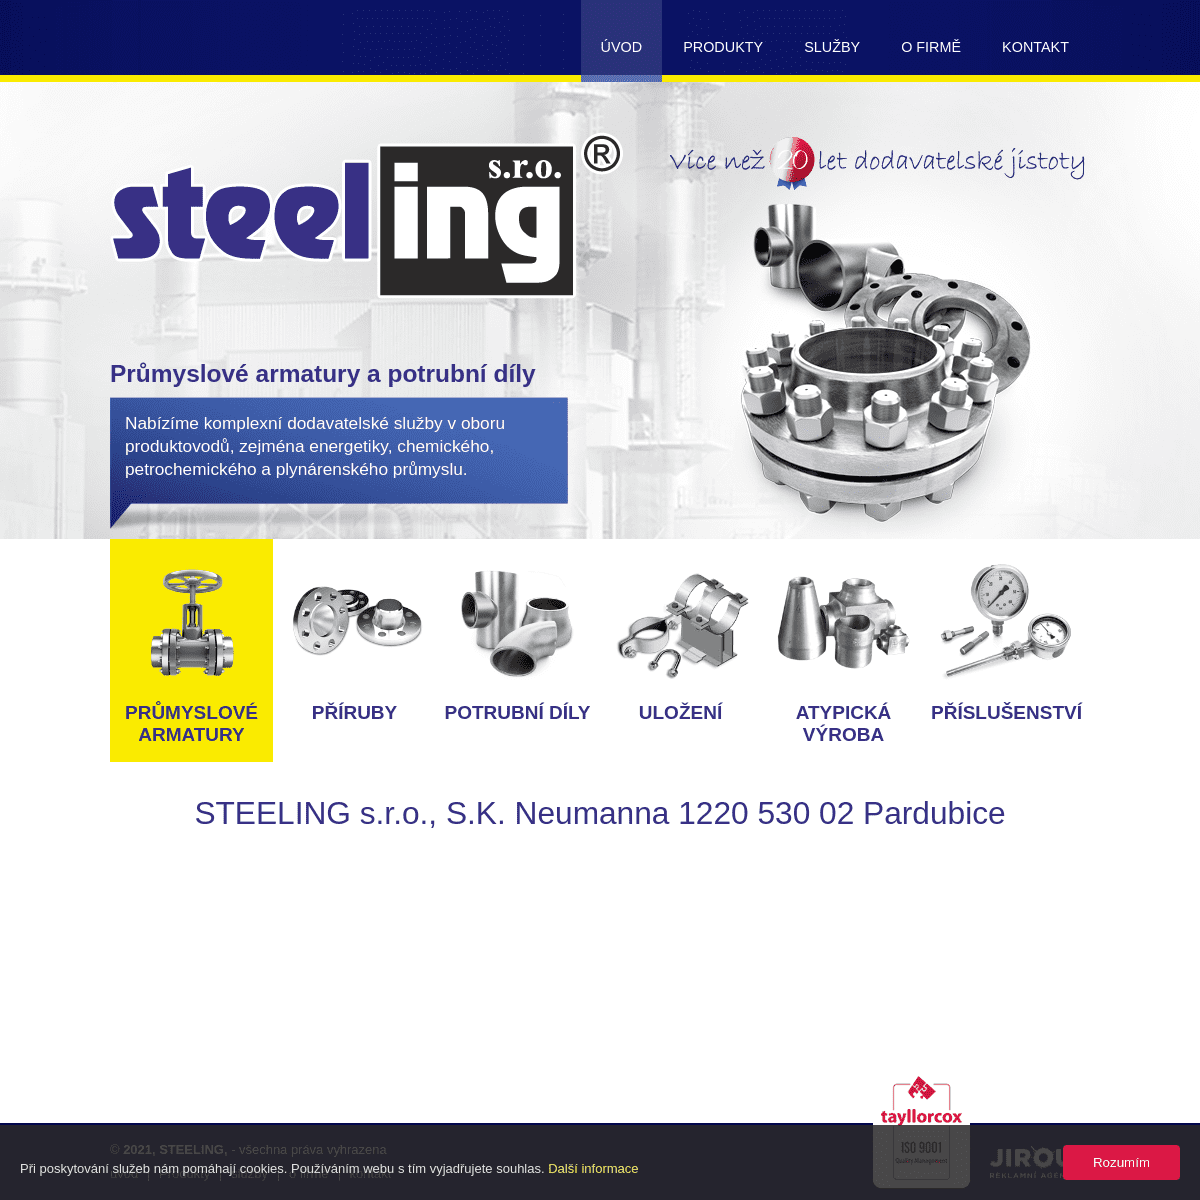 A complete backup of https://steeling.cz